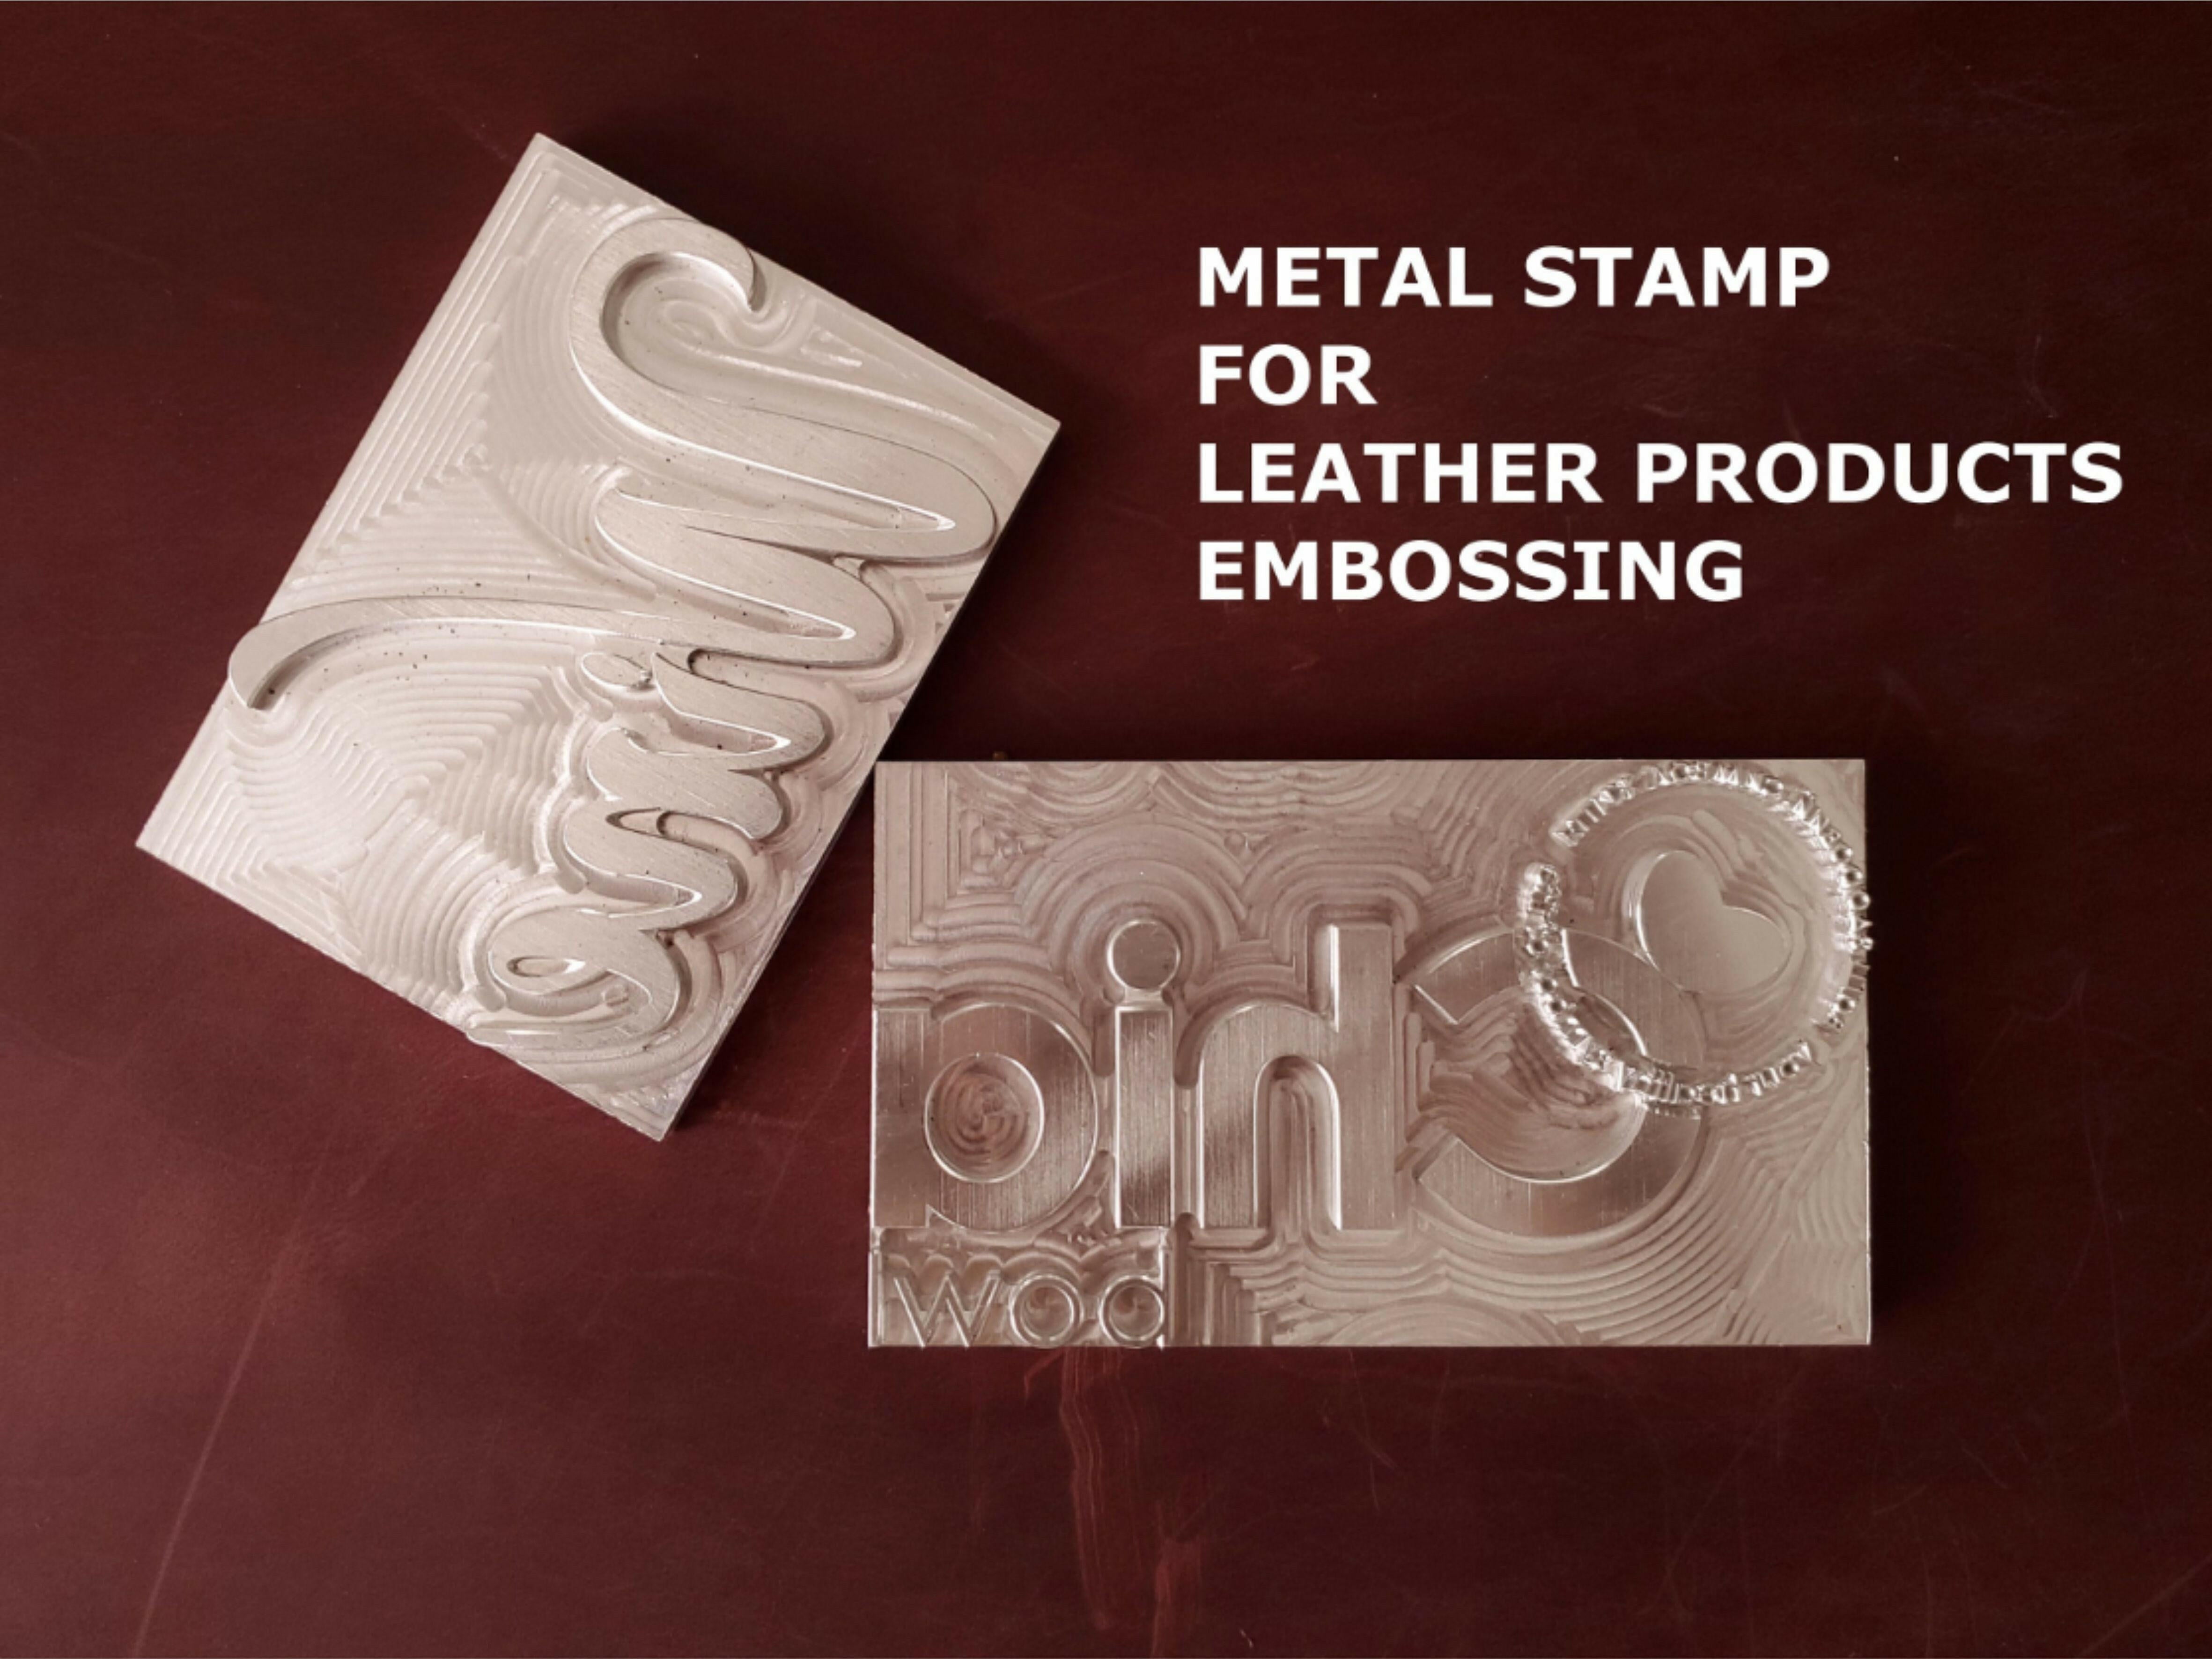 Debossing stamp for leather products